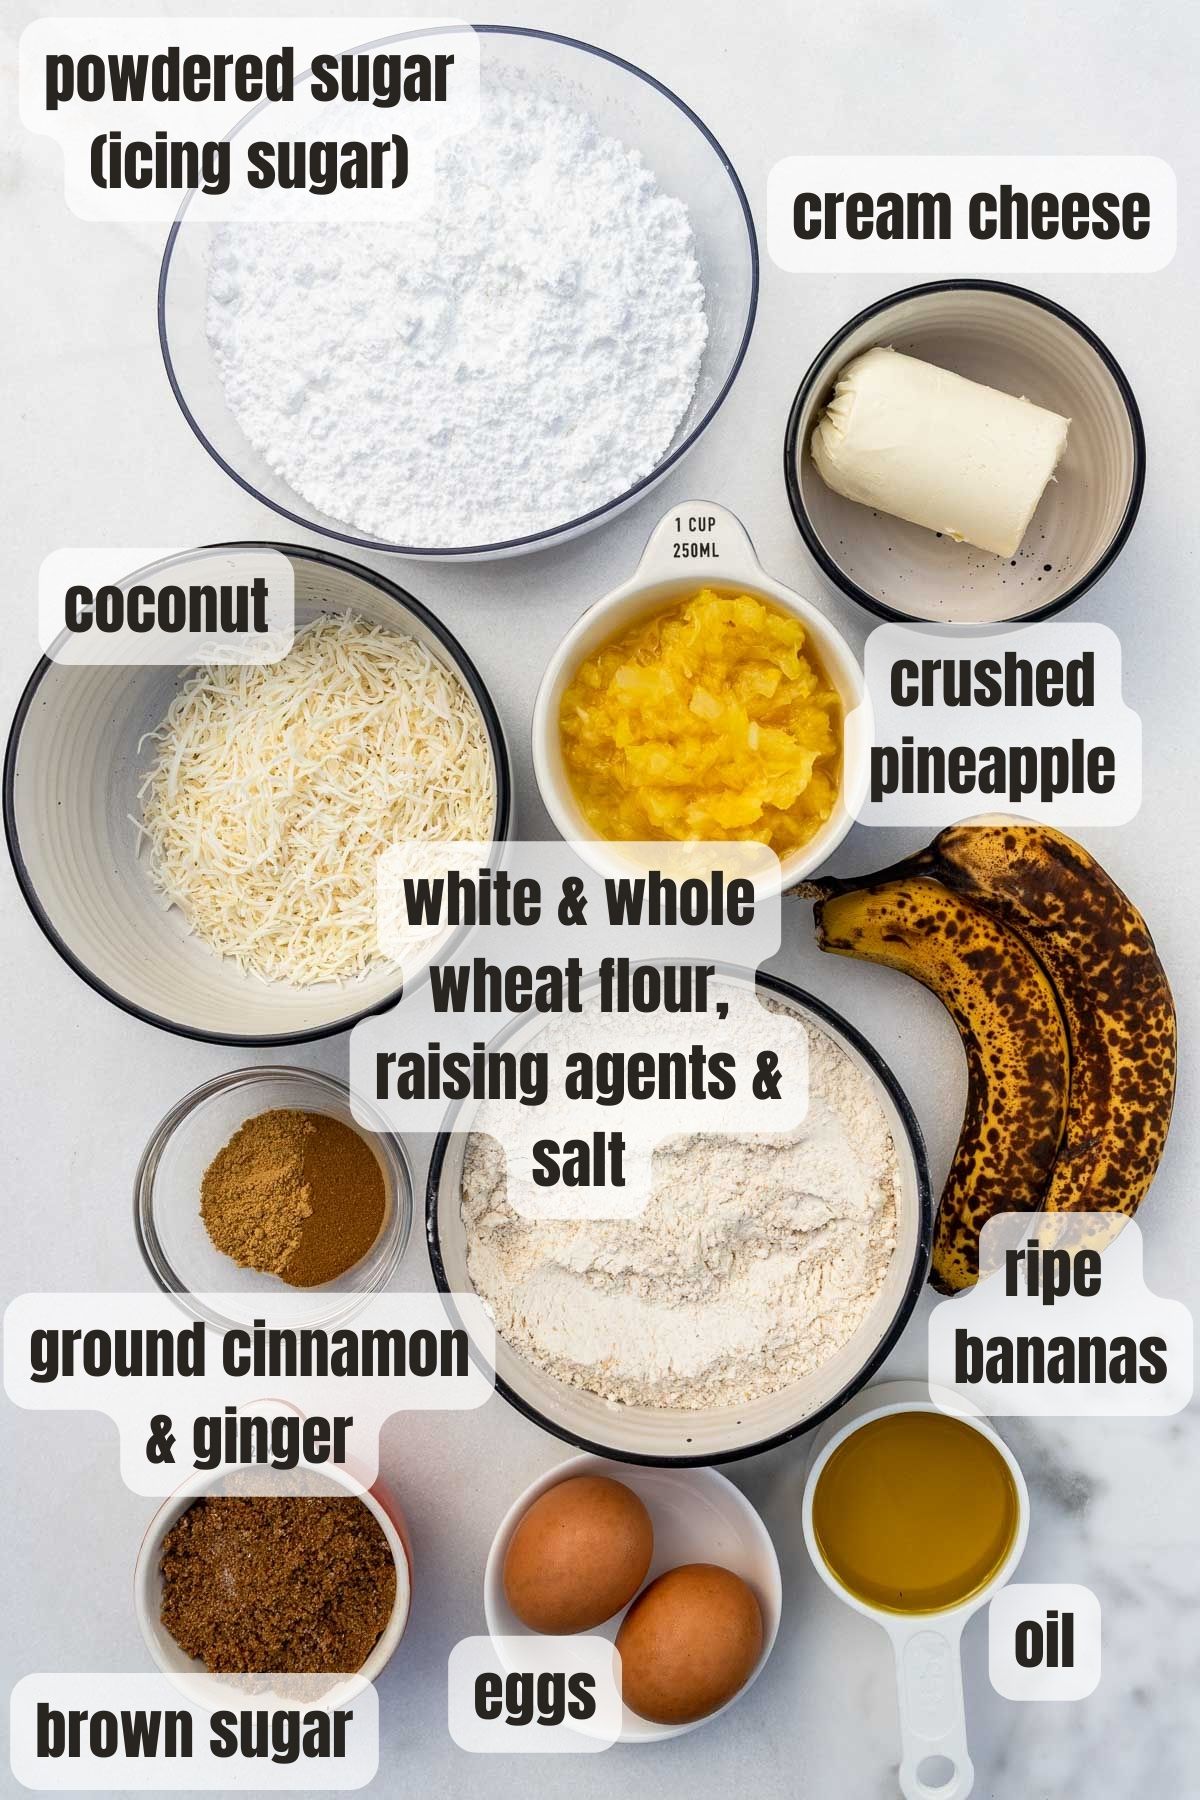 Overhead view of all the ingredients needed for a pineapple banana cake including white and whole wheat flour, raising agents and salt, brown sugar, eggs, oil, ripe bananas, ground cinnamon and ginger, coconut, crushed pineapple, cream cheese and powdered sugar.